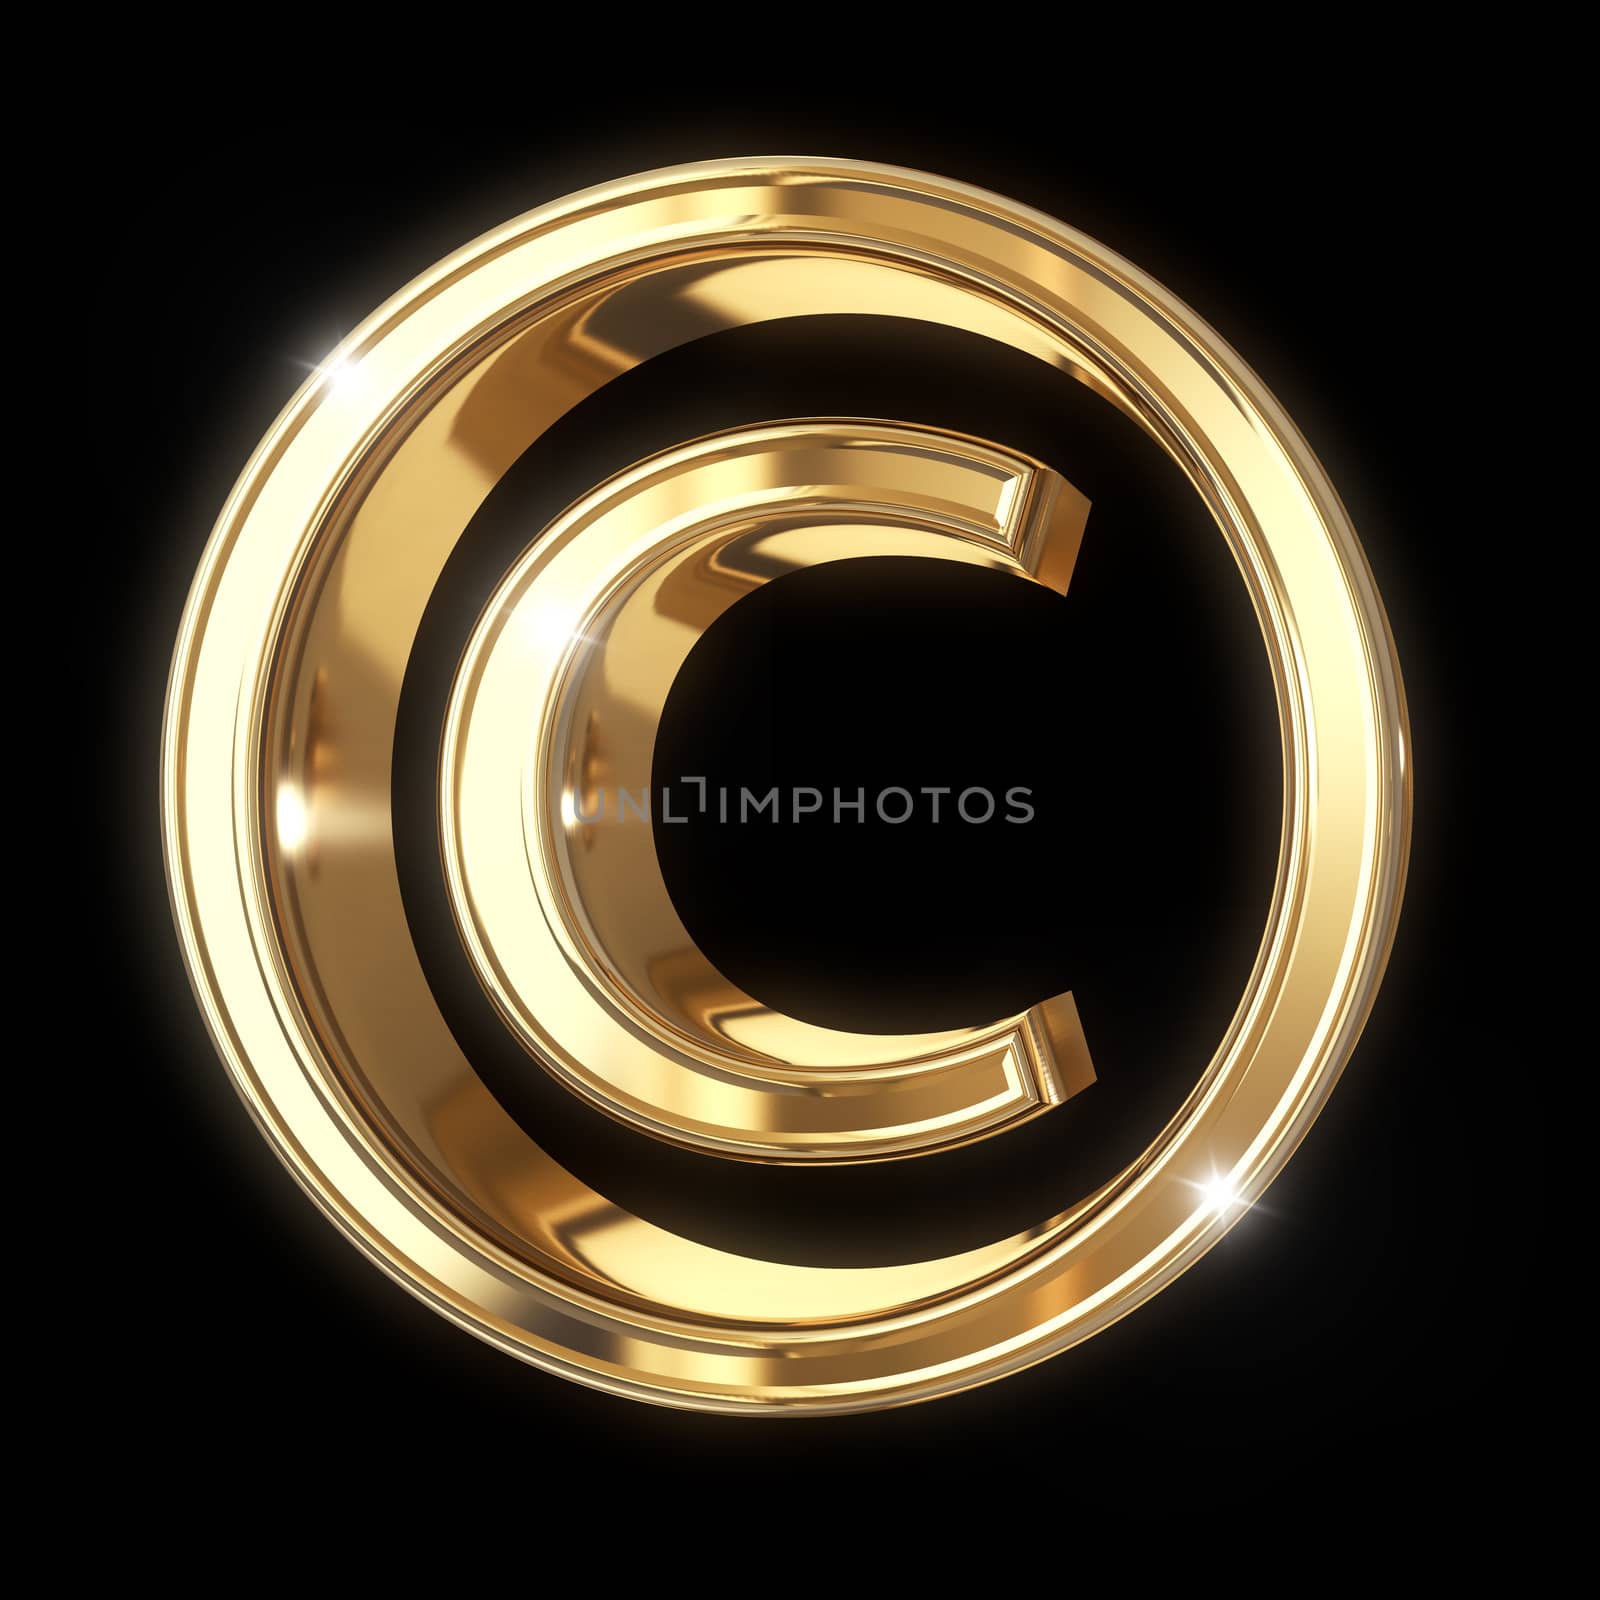 Copyright symbol with clipping path by 123dartist